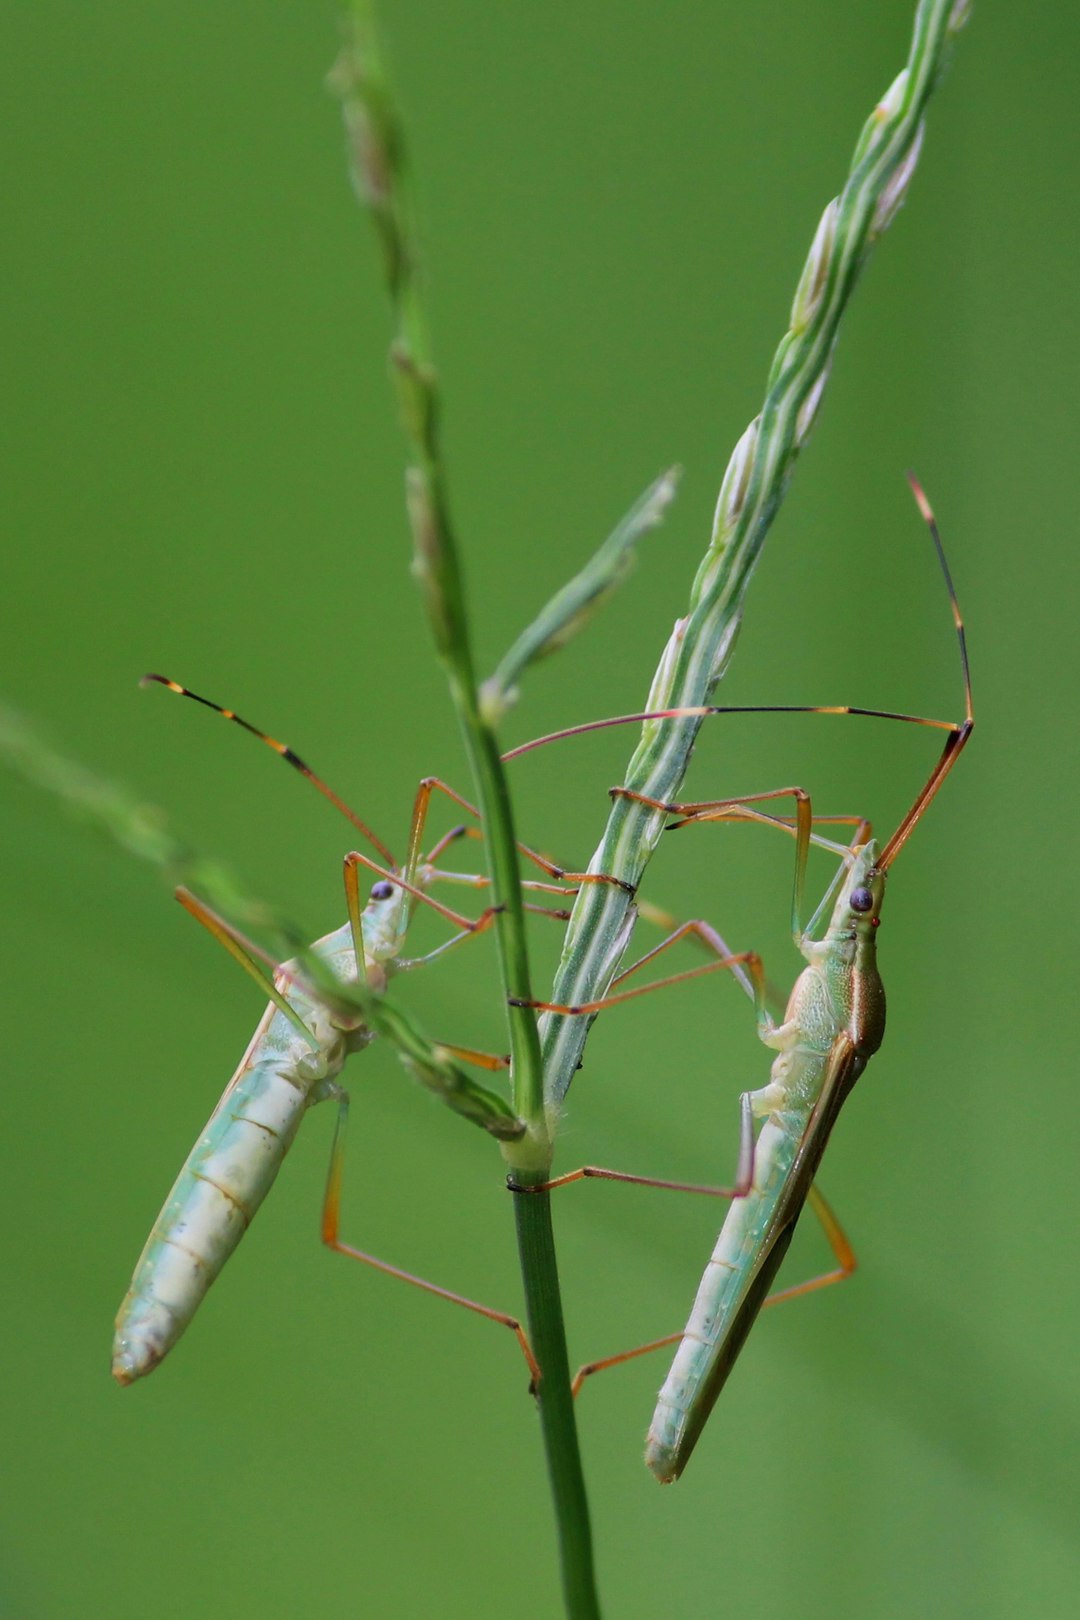 green praying mantis perched on green grass in close up photography during daytime